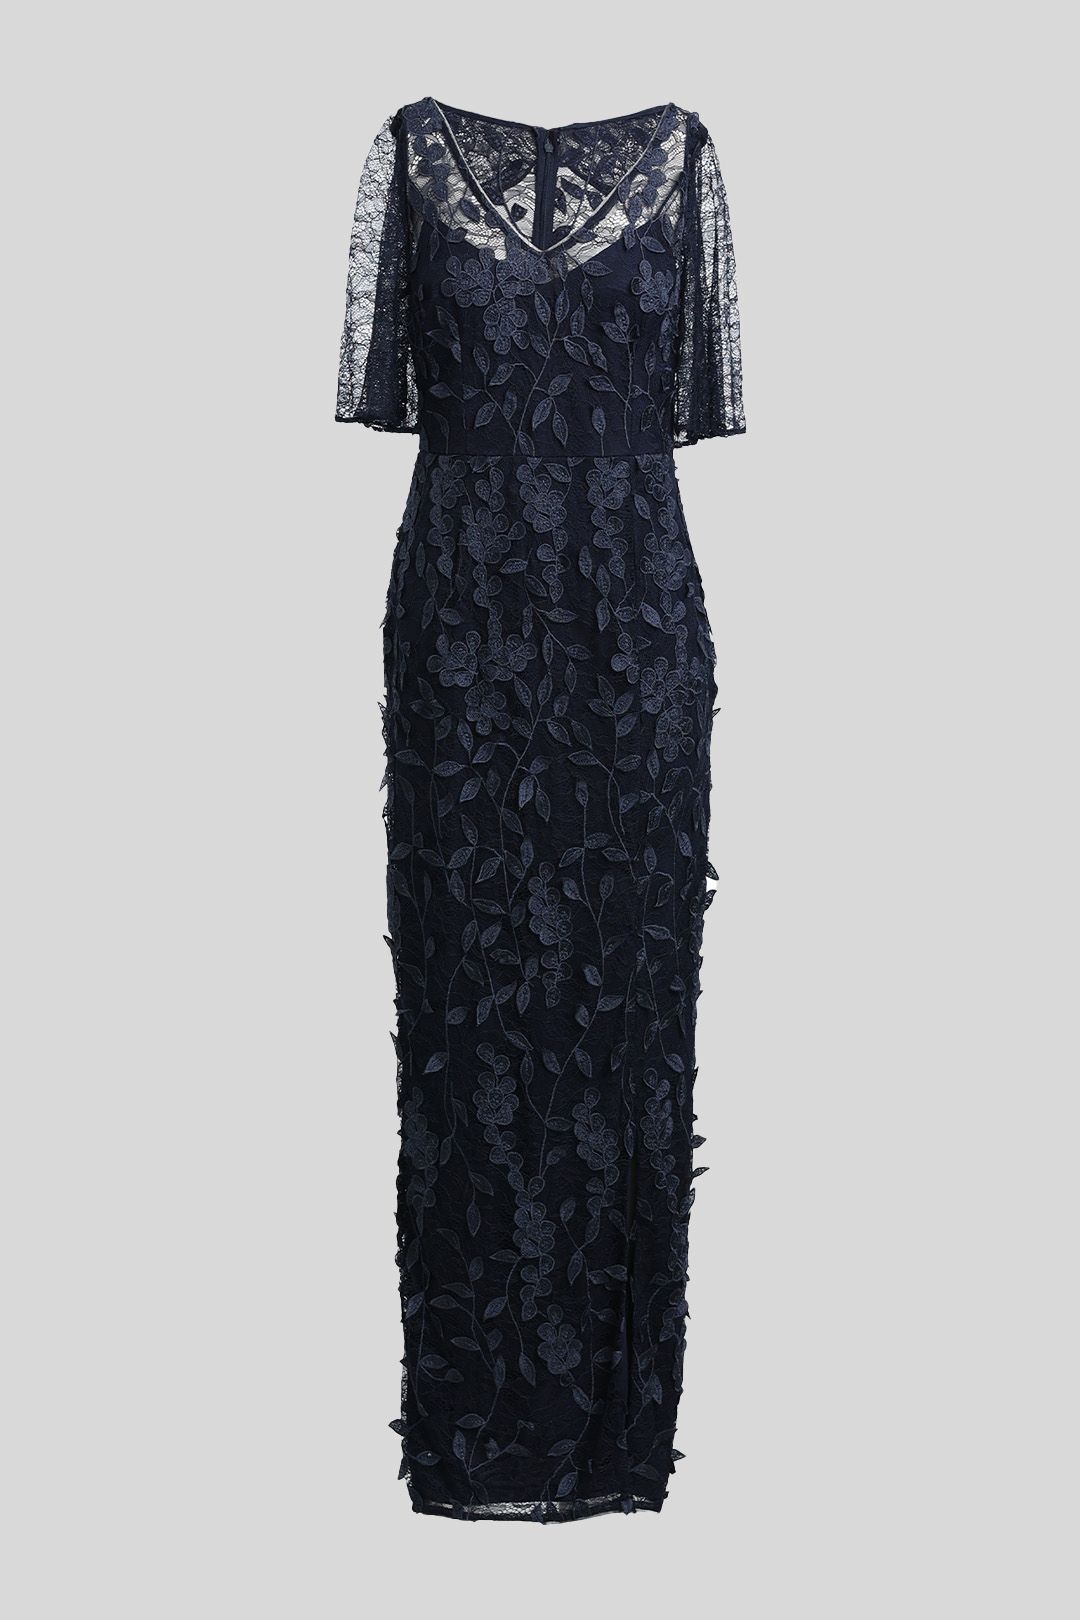 Adrianna Papell - Embroidered Navy Lace Gown